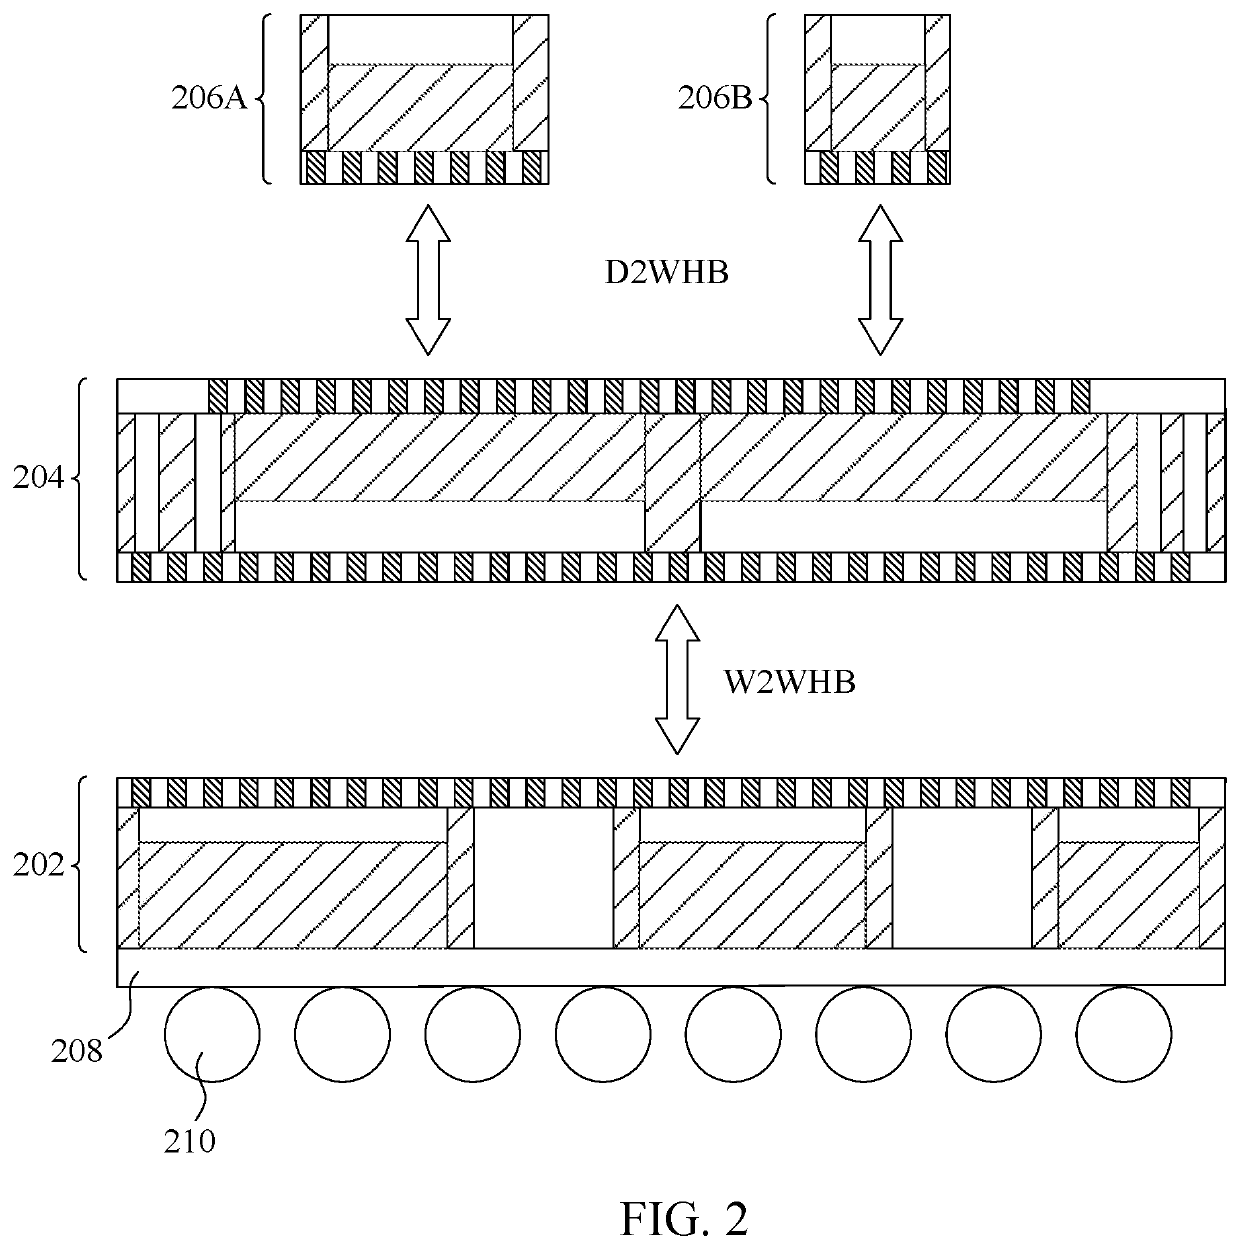 Integrated circuit assembly with hybrid bonding